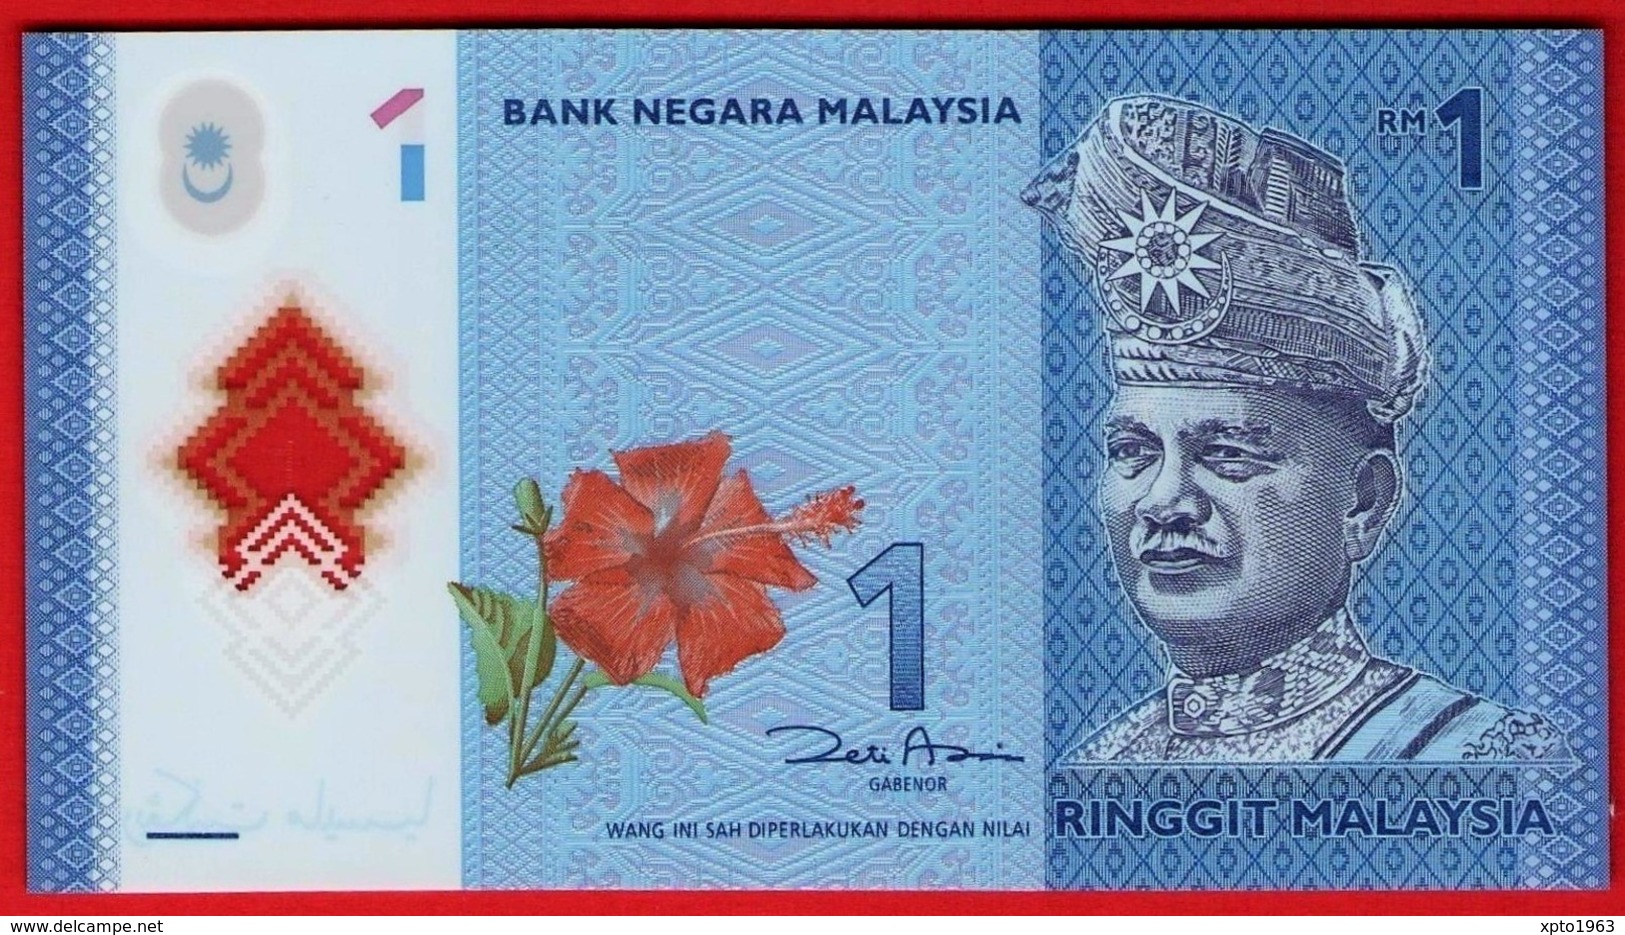 Malaysia 1 Ringgit RM1 (2012) / JC/JB SAME NUMBER 6666655 - P51 Pair - Polymer UNC FDS NEUF - Malaysie